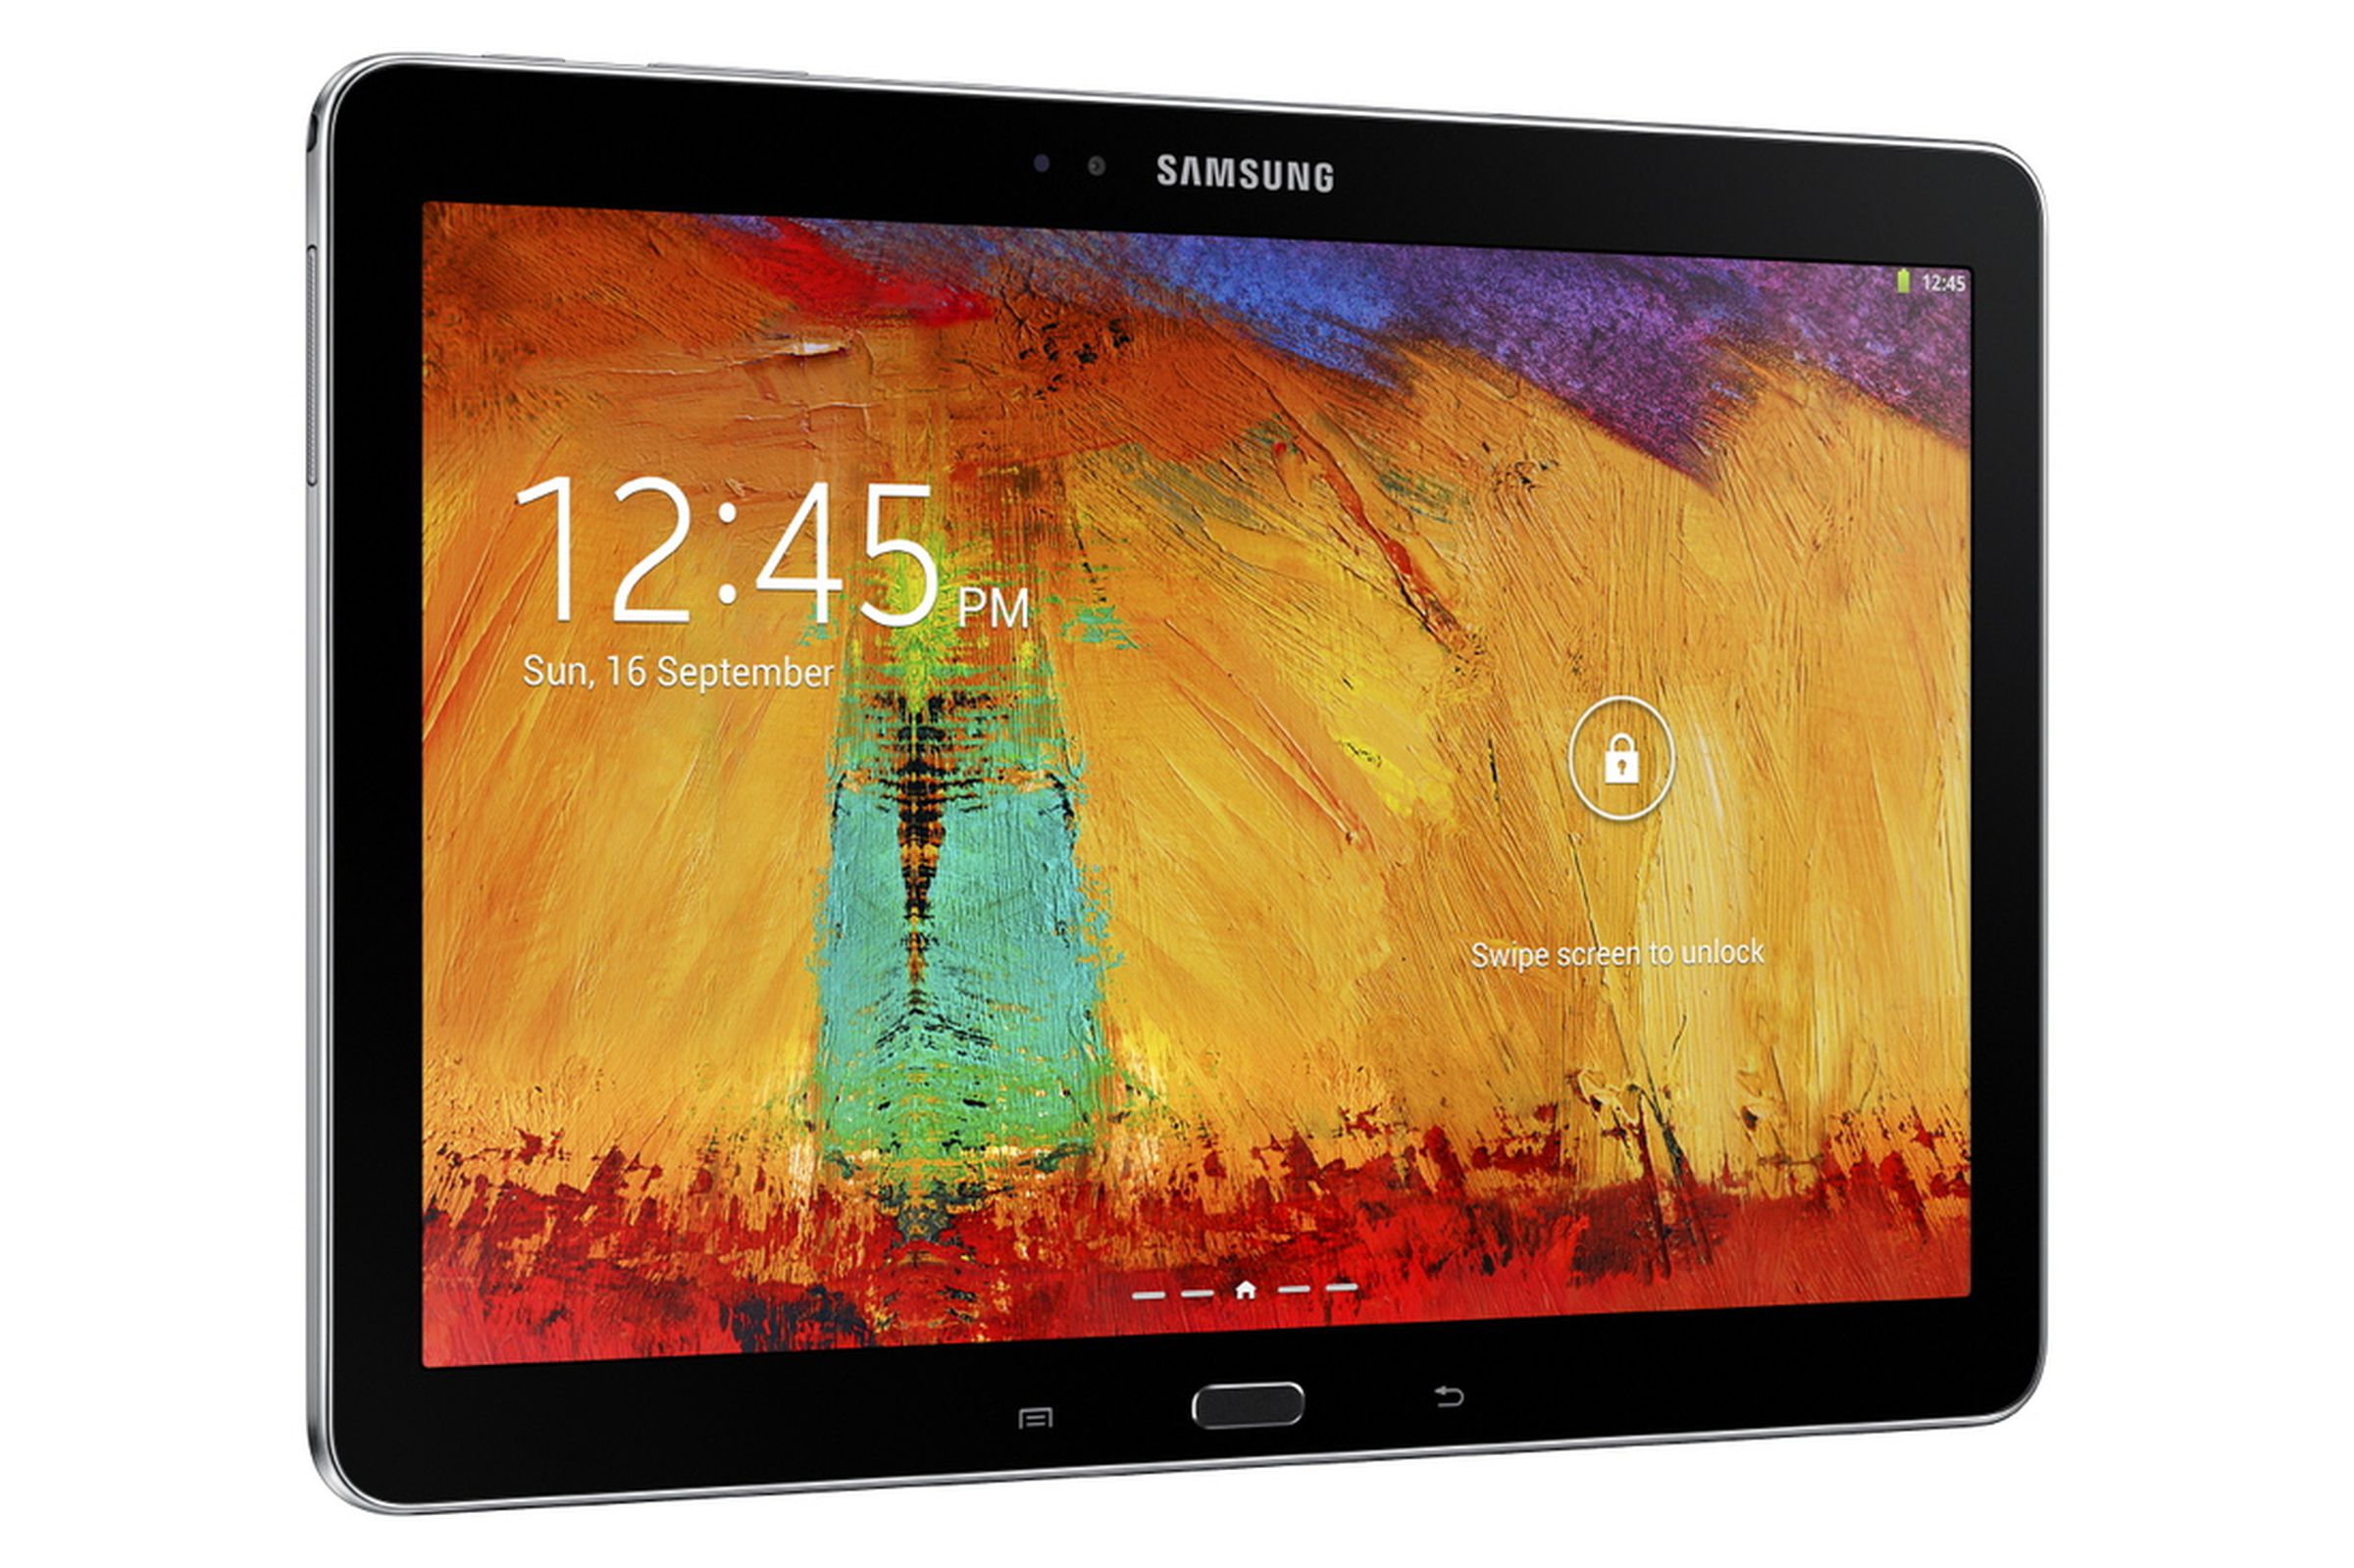 Samsung Galaxy Note 10.1 2014 Edition product photos